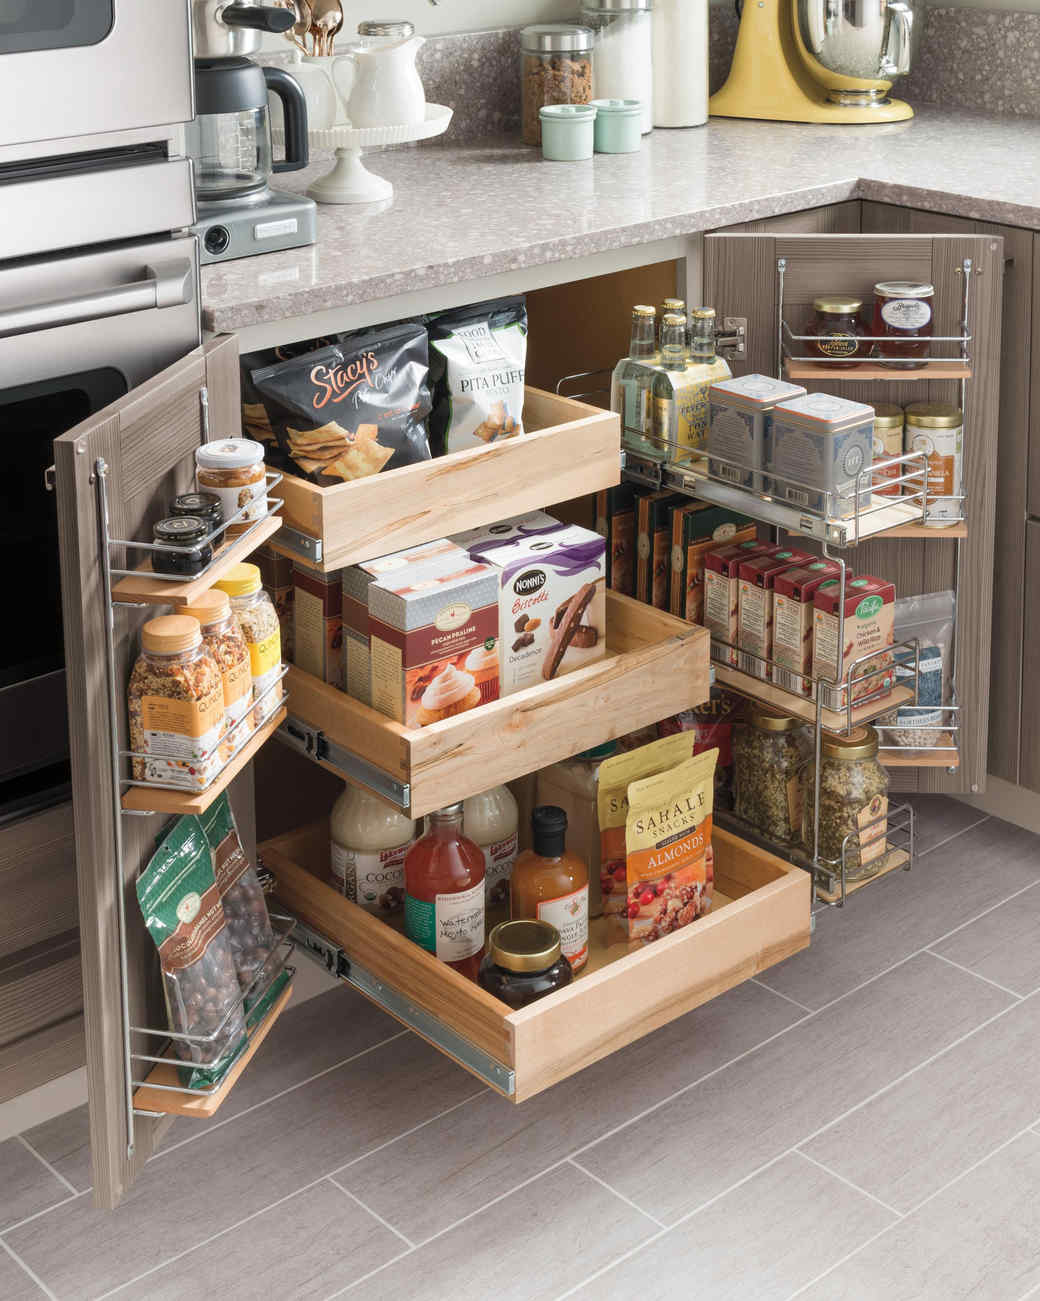 Storage Idea For Kitchen
 Small Kitchen Storage Ideas for a More Efficient Space